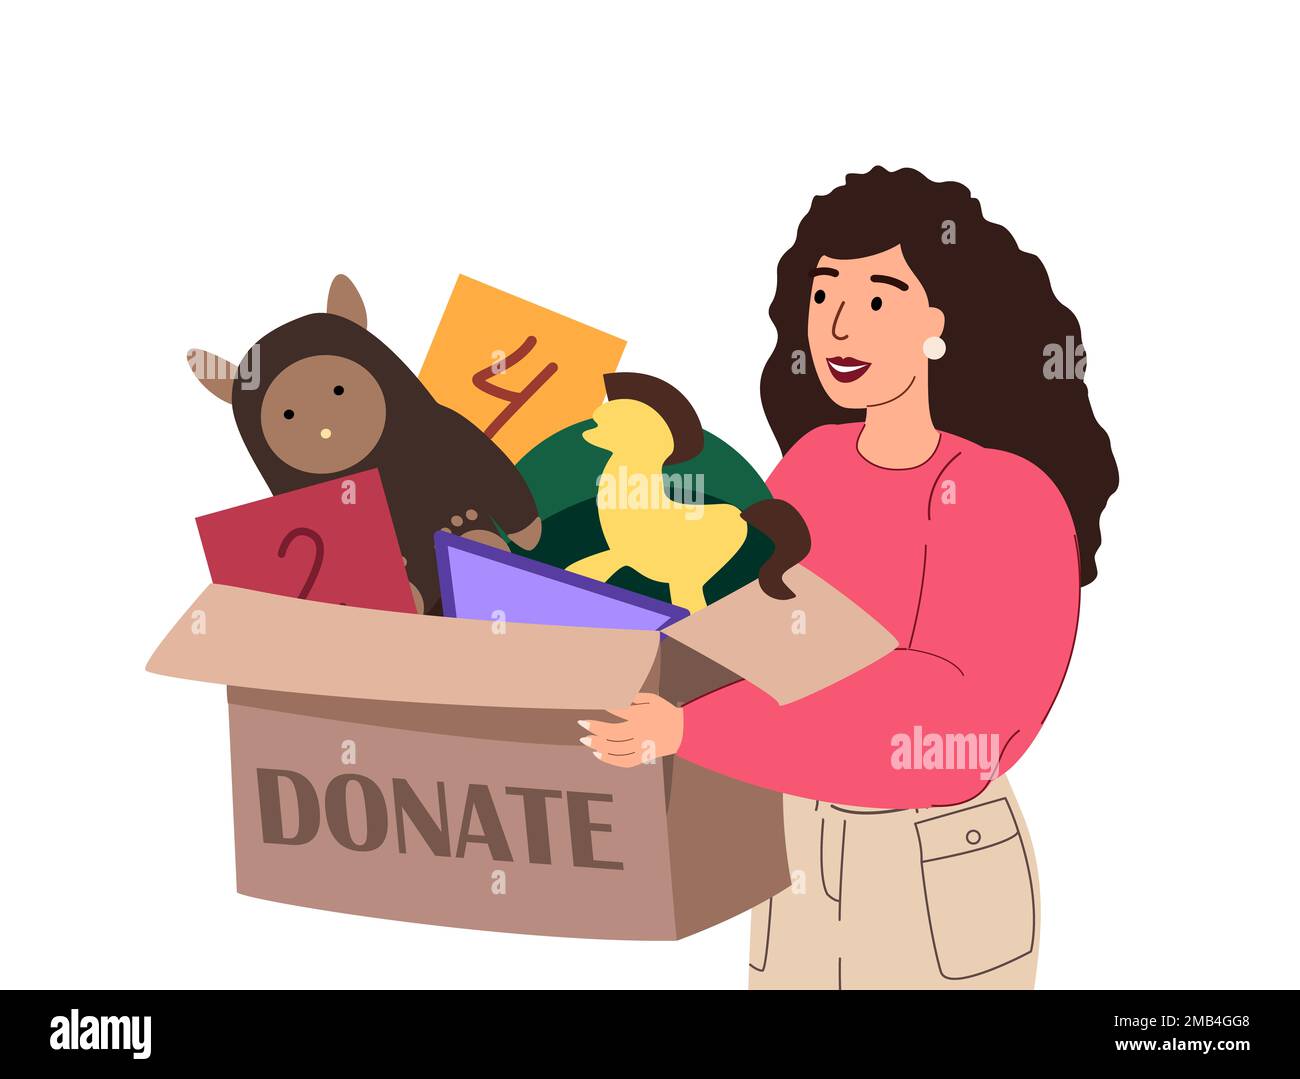 Action pour les enfants.Collect Toys to help Children.Woman with Box full of Free Toys,Donation Box,Children social support and assistance concept.Humanitaria Banque D'Images